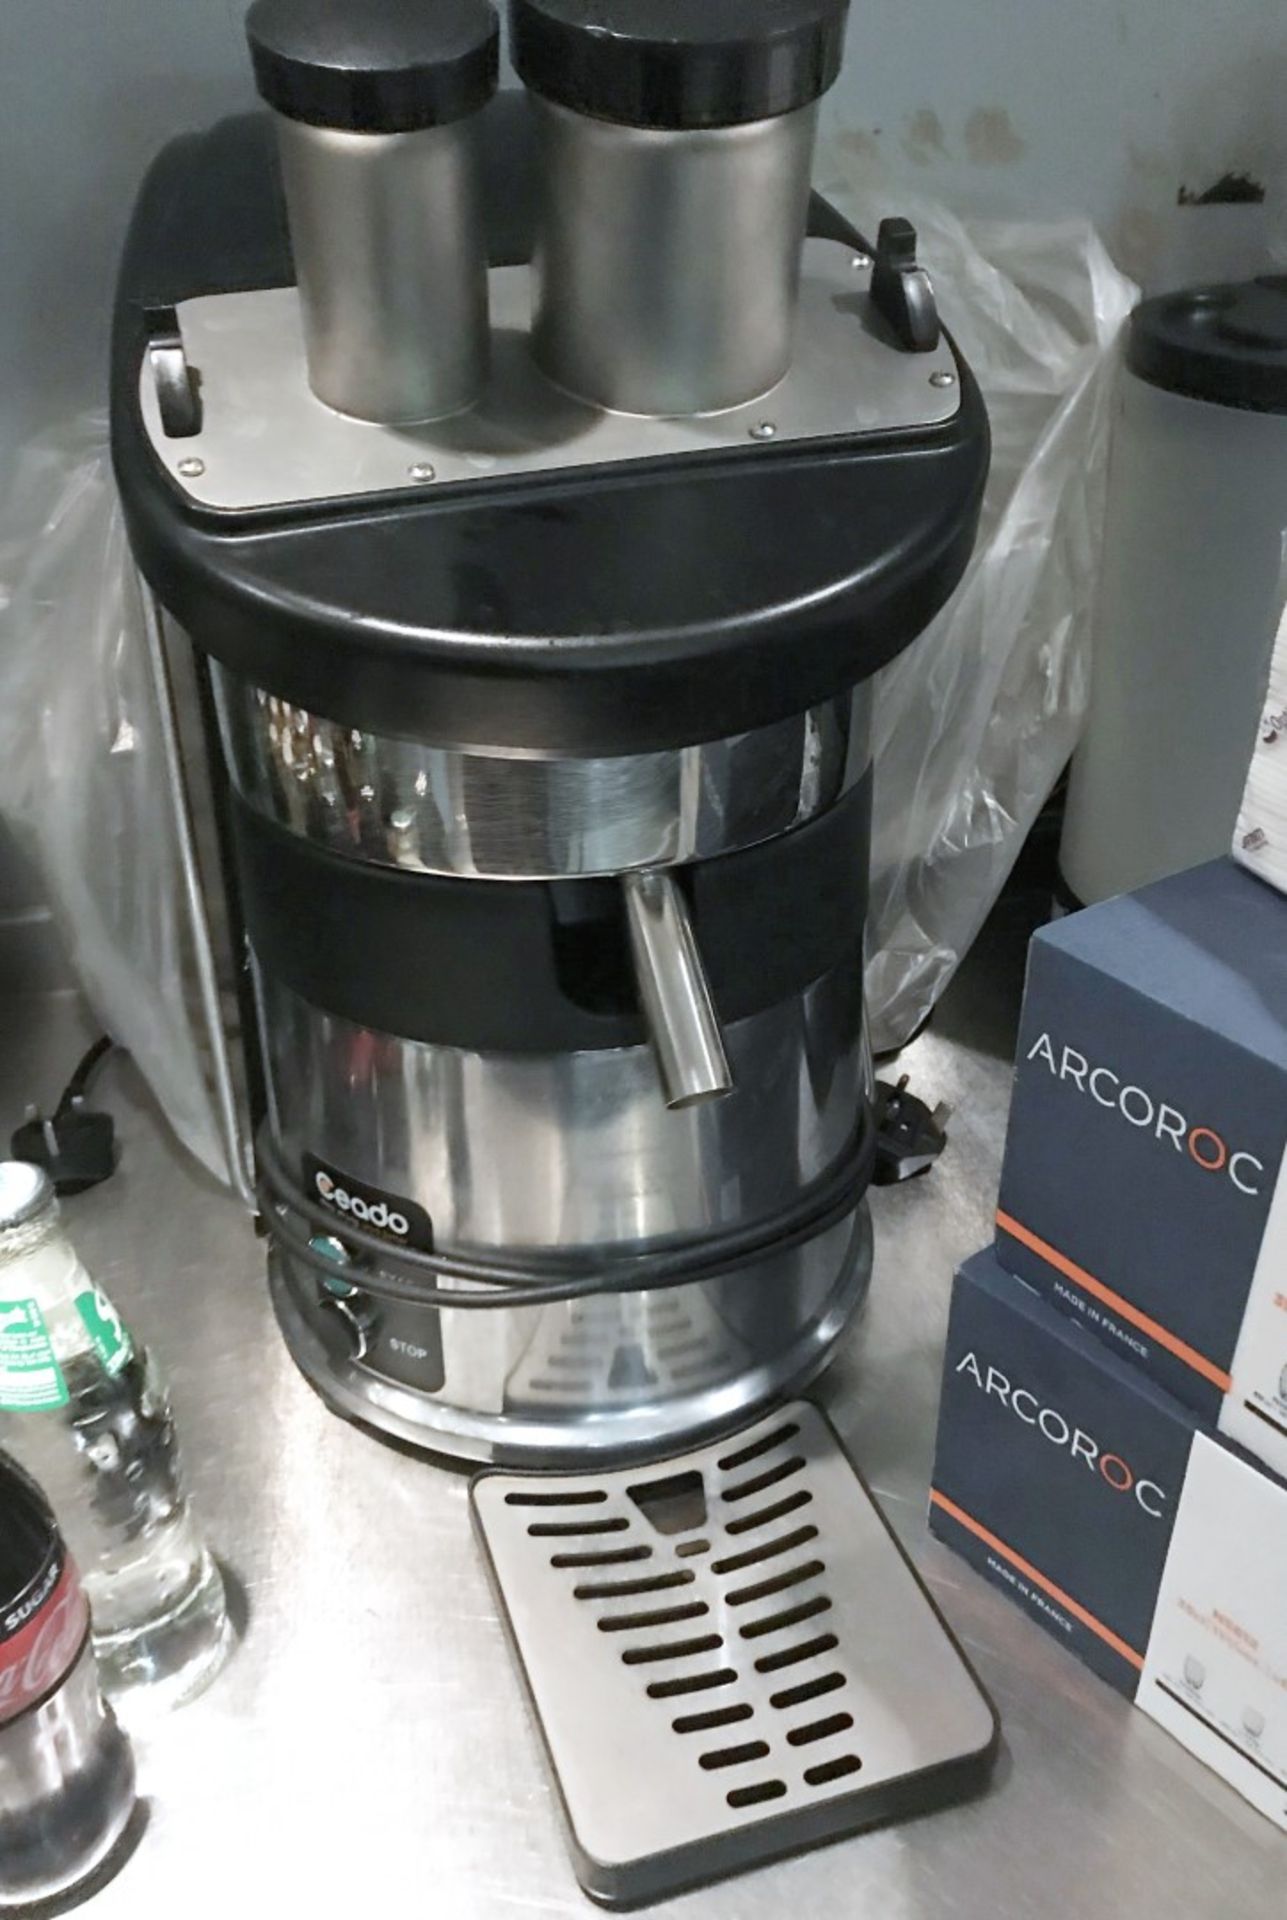 1 x Ceado Centrifugal Juice Extractor - RRP £1,990 - 240v - Ref: RB223 - CL584 - Location: London